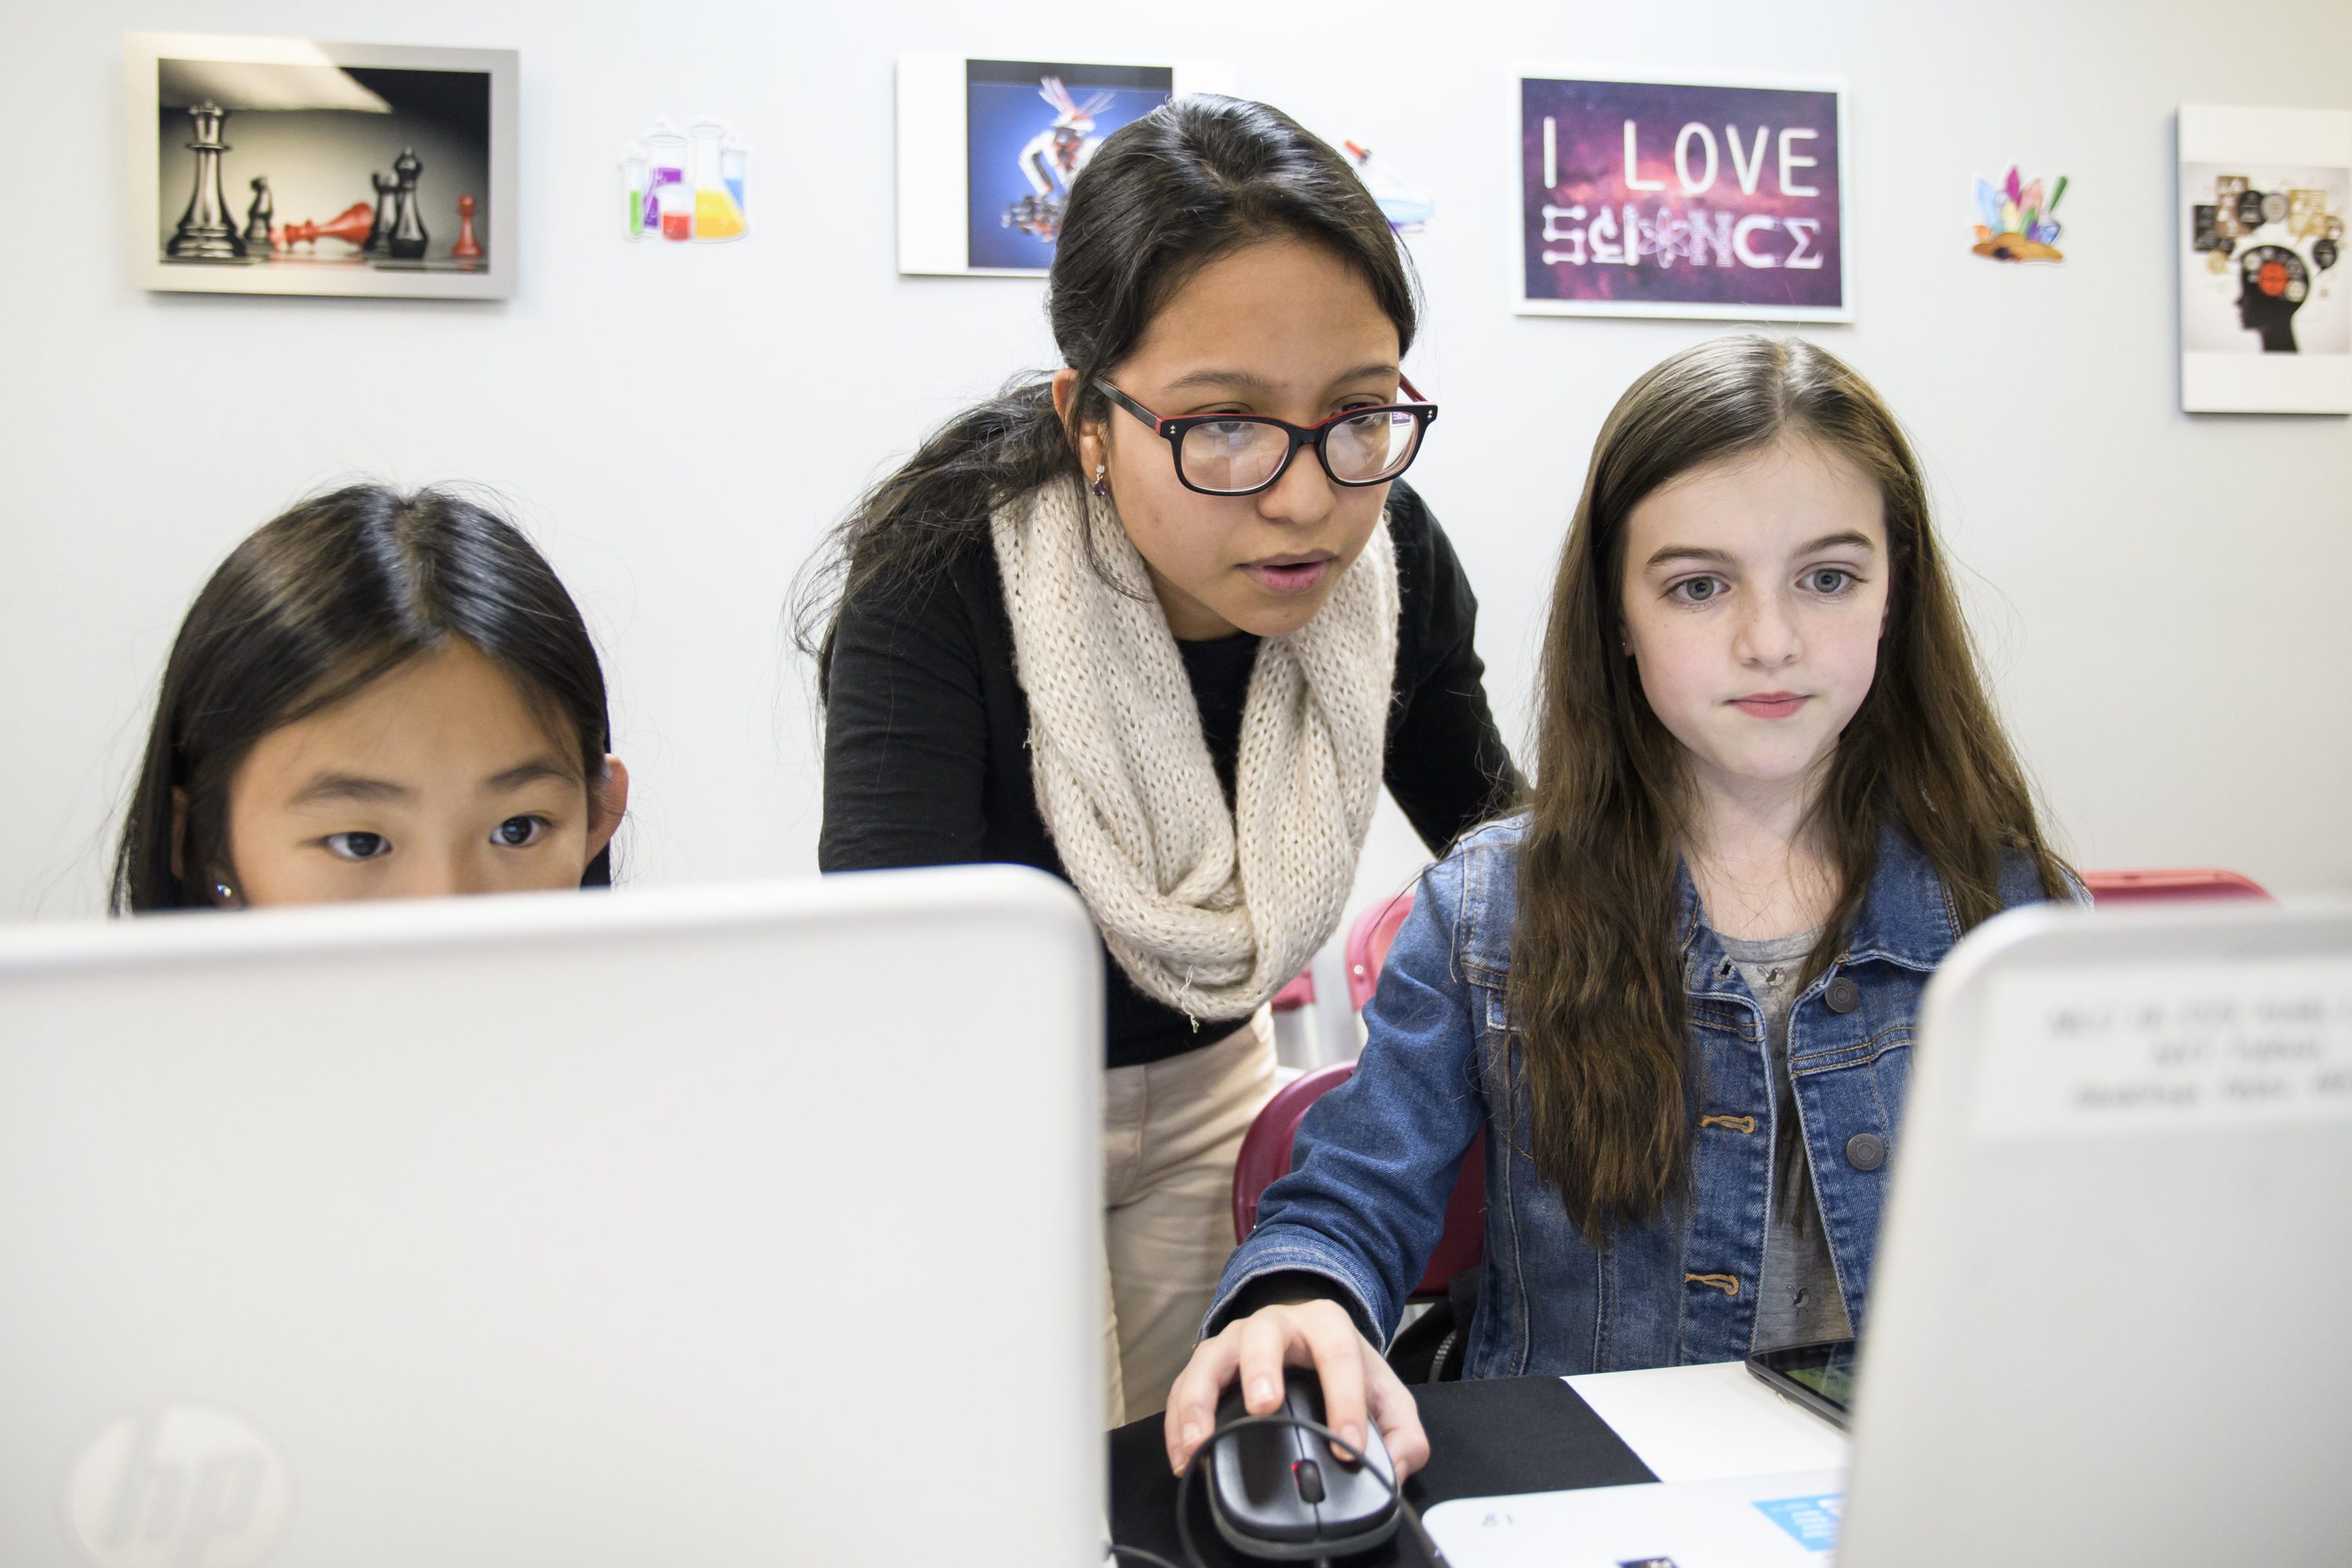 Best Academic Summer Camps Nyc Kids Need To Check Out In 2020 - game design camp in roblox build and code an adventure game 5 session small online class for ages 9 14